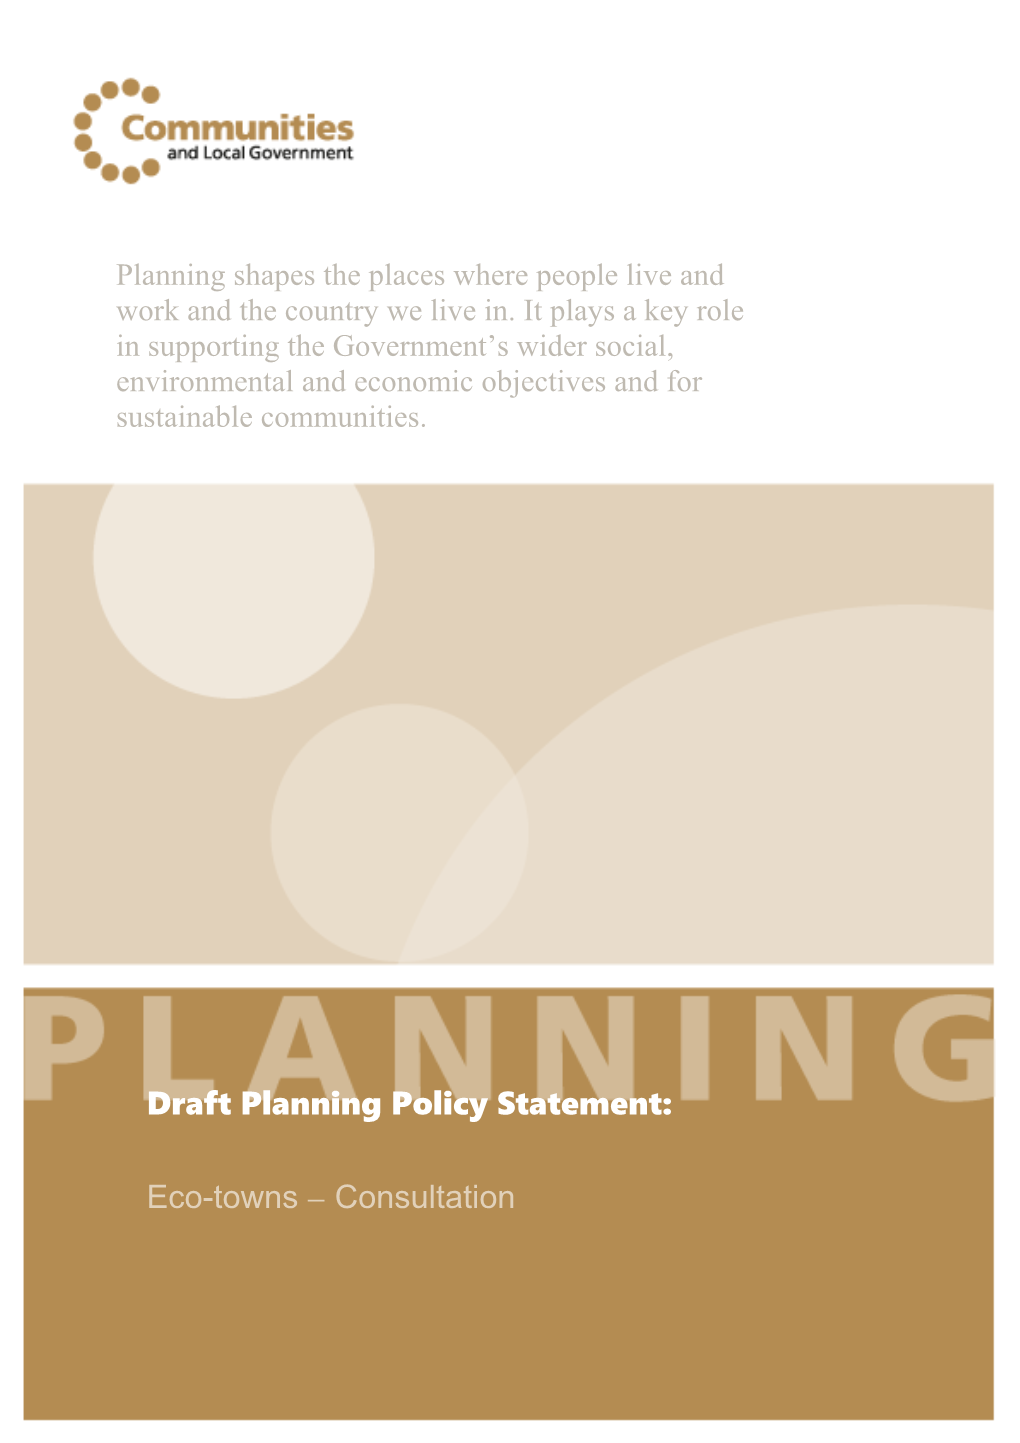 Draft Planning Policy Statement